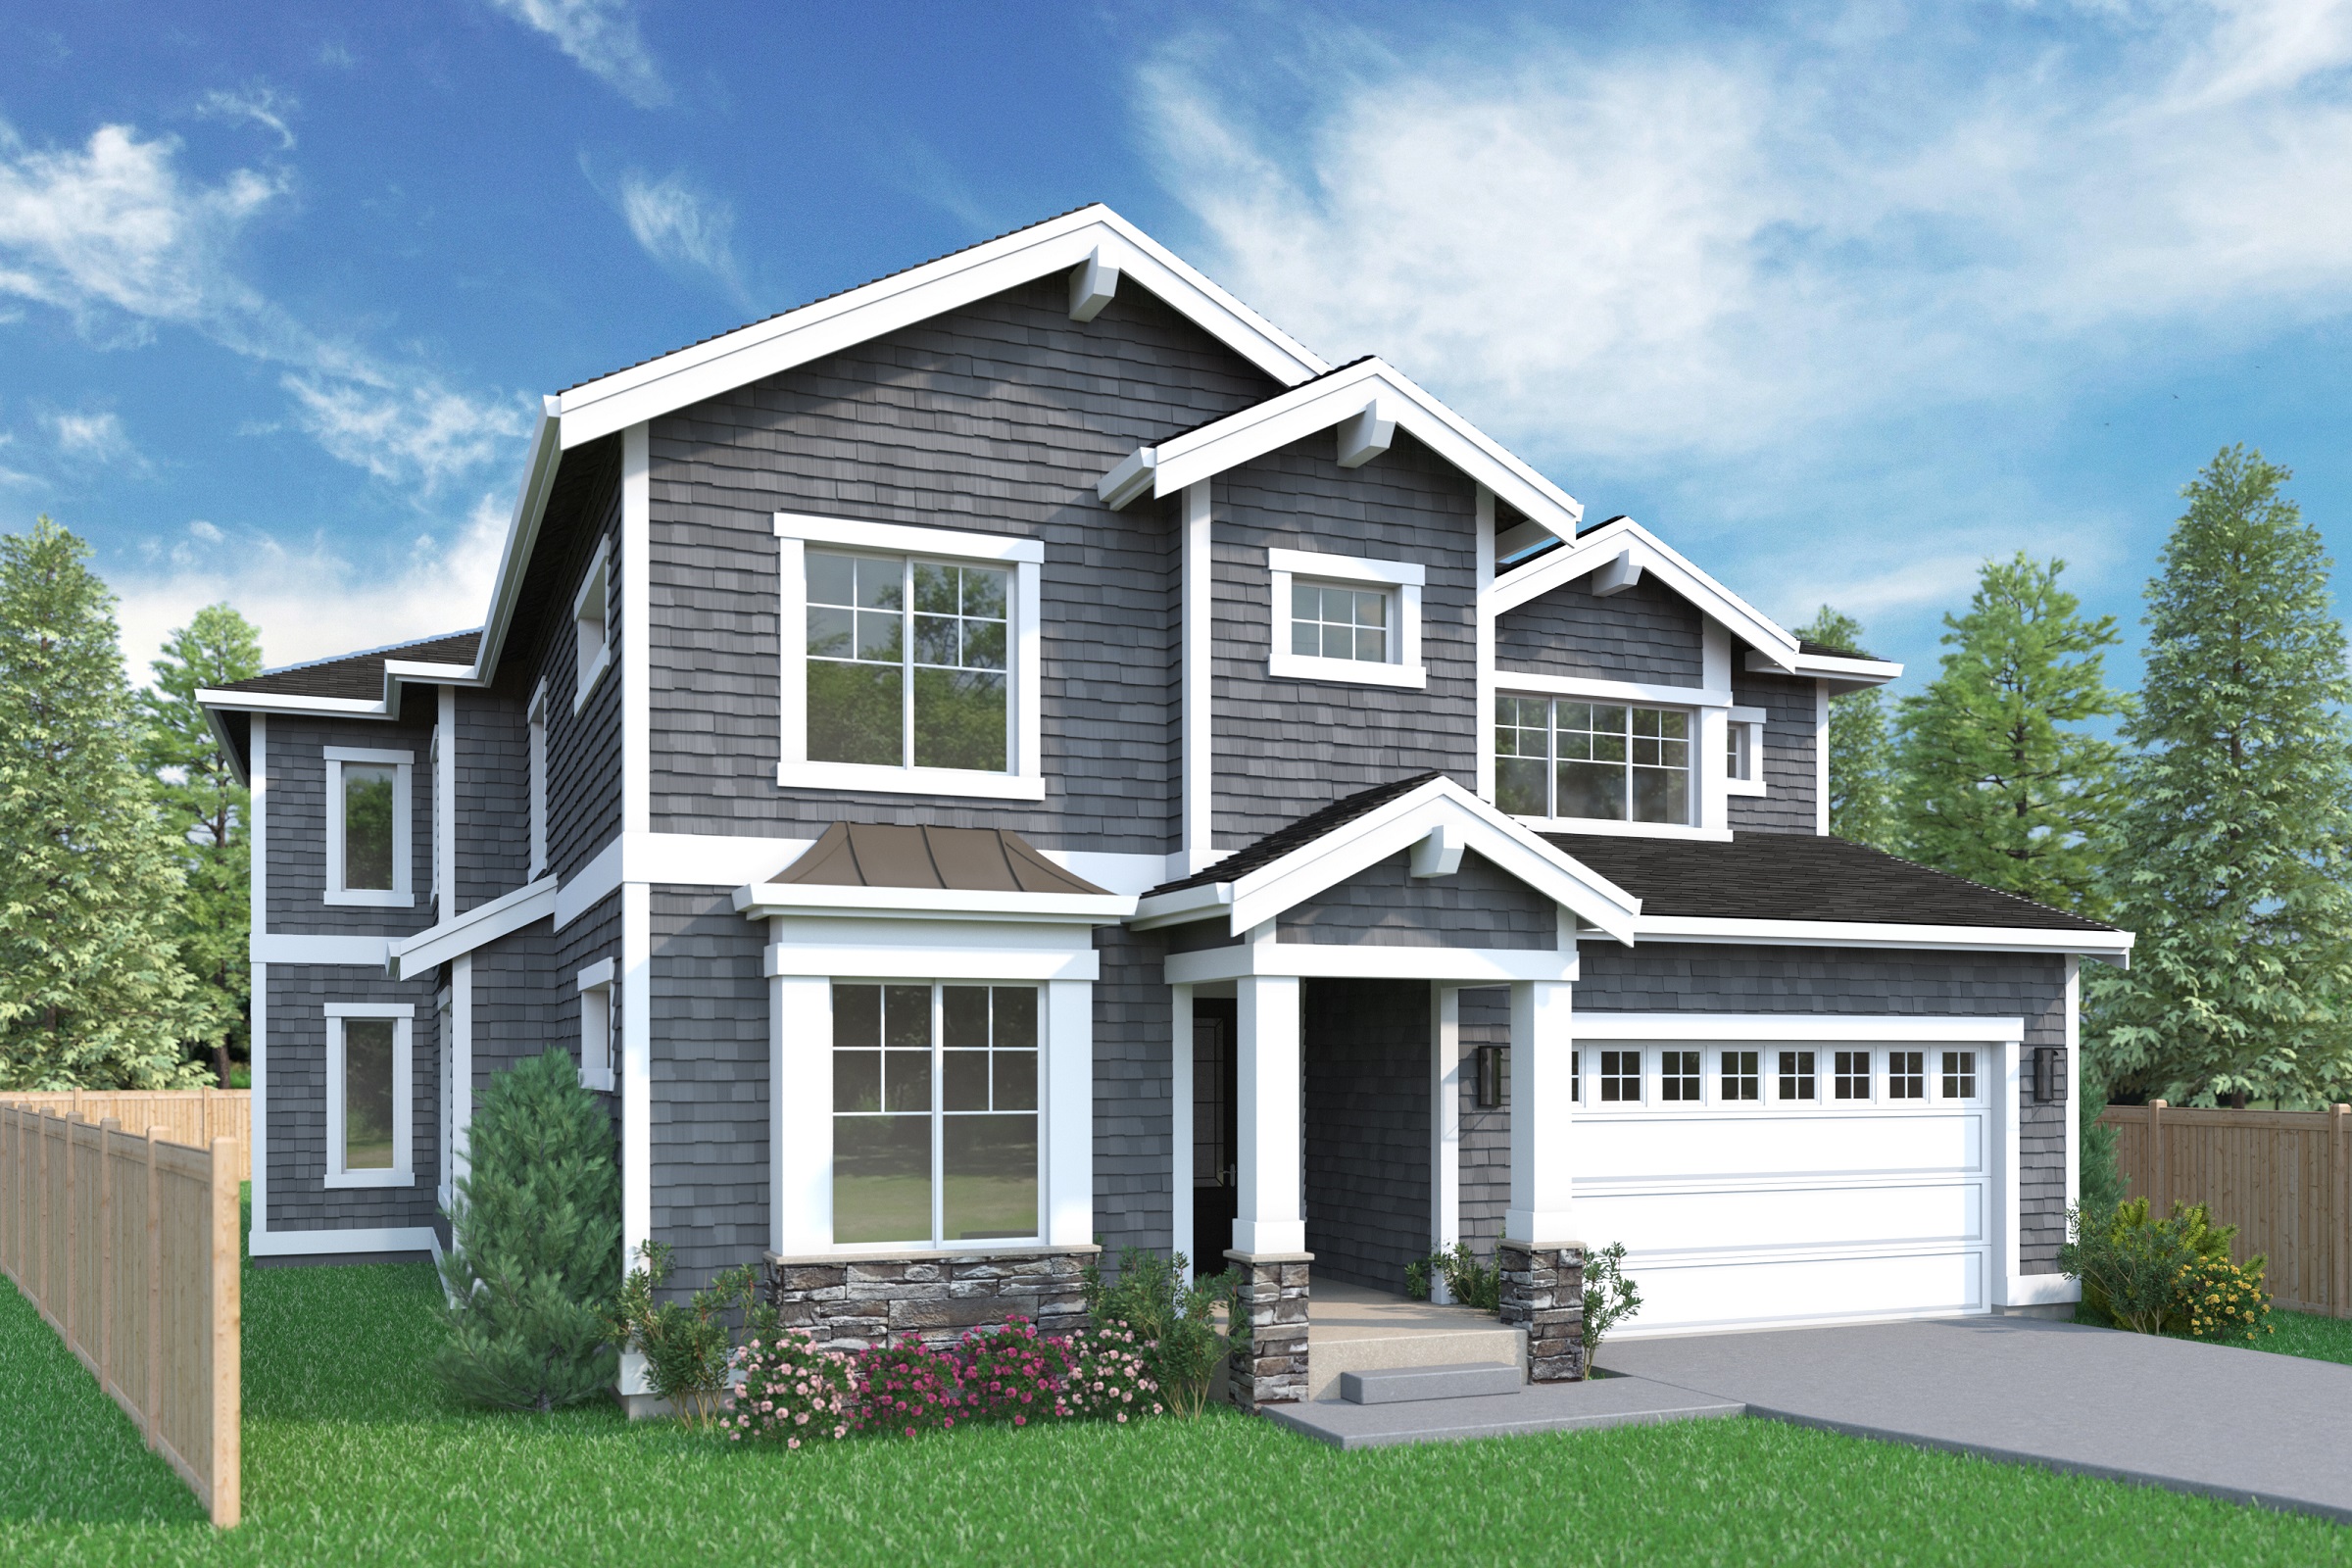 View our new luxury home construction on 15615 SE 45th PL, in Bellevue, WA from MN Custom Homes